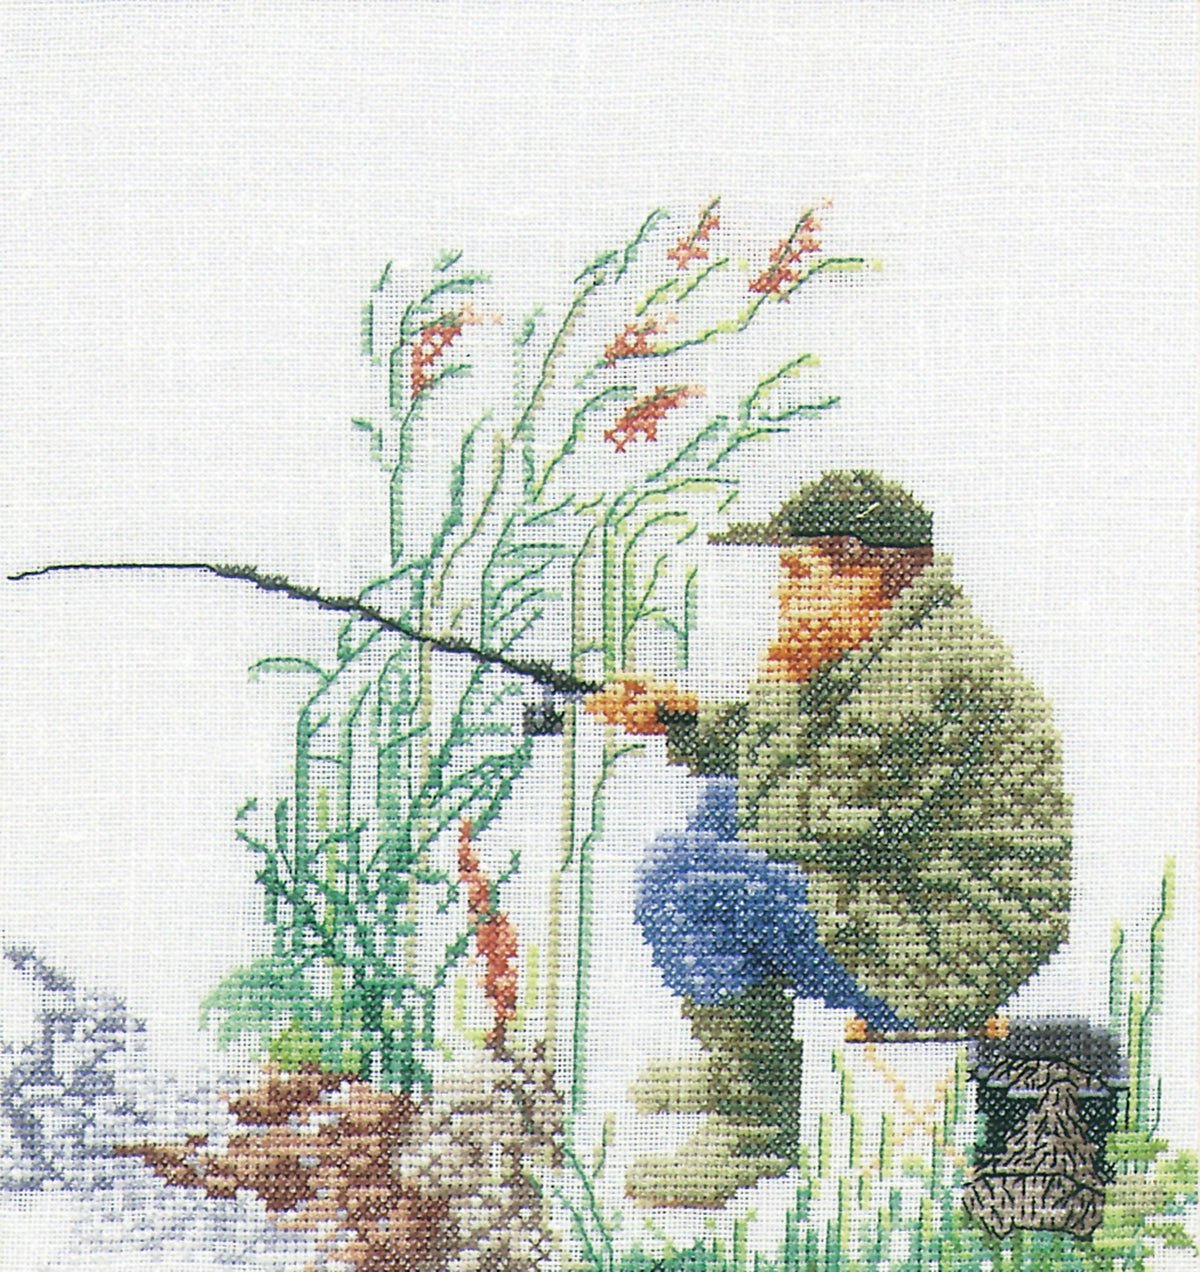 Thea Gouverneur - Counted Cross Stitch Kit - Fishing - Aida - 18 count - 3034A - Thea Gouverneur Since 1959